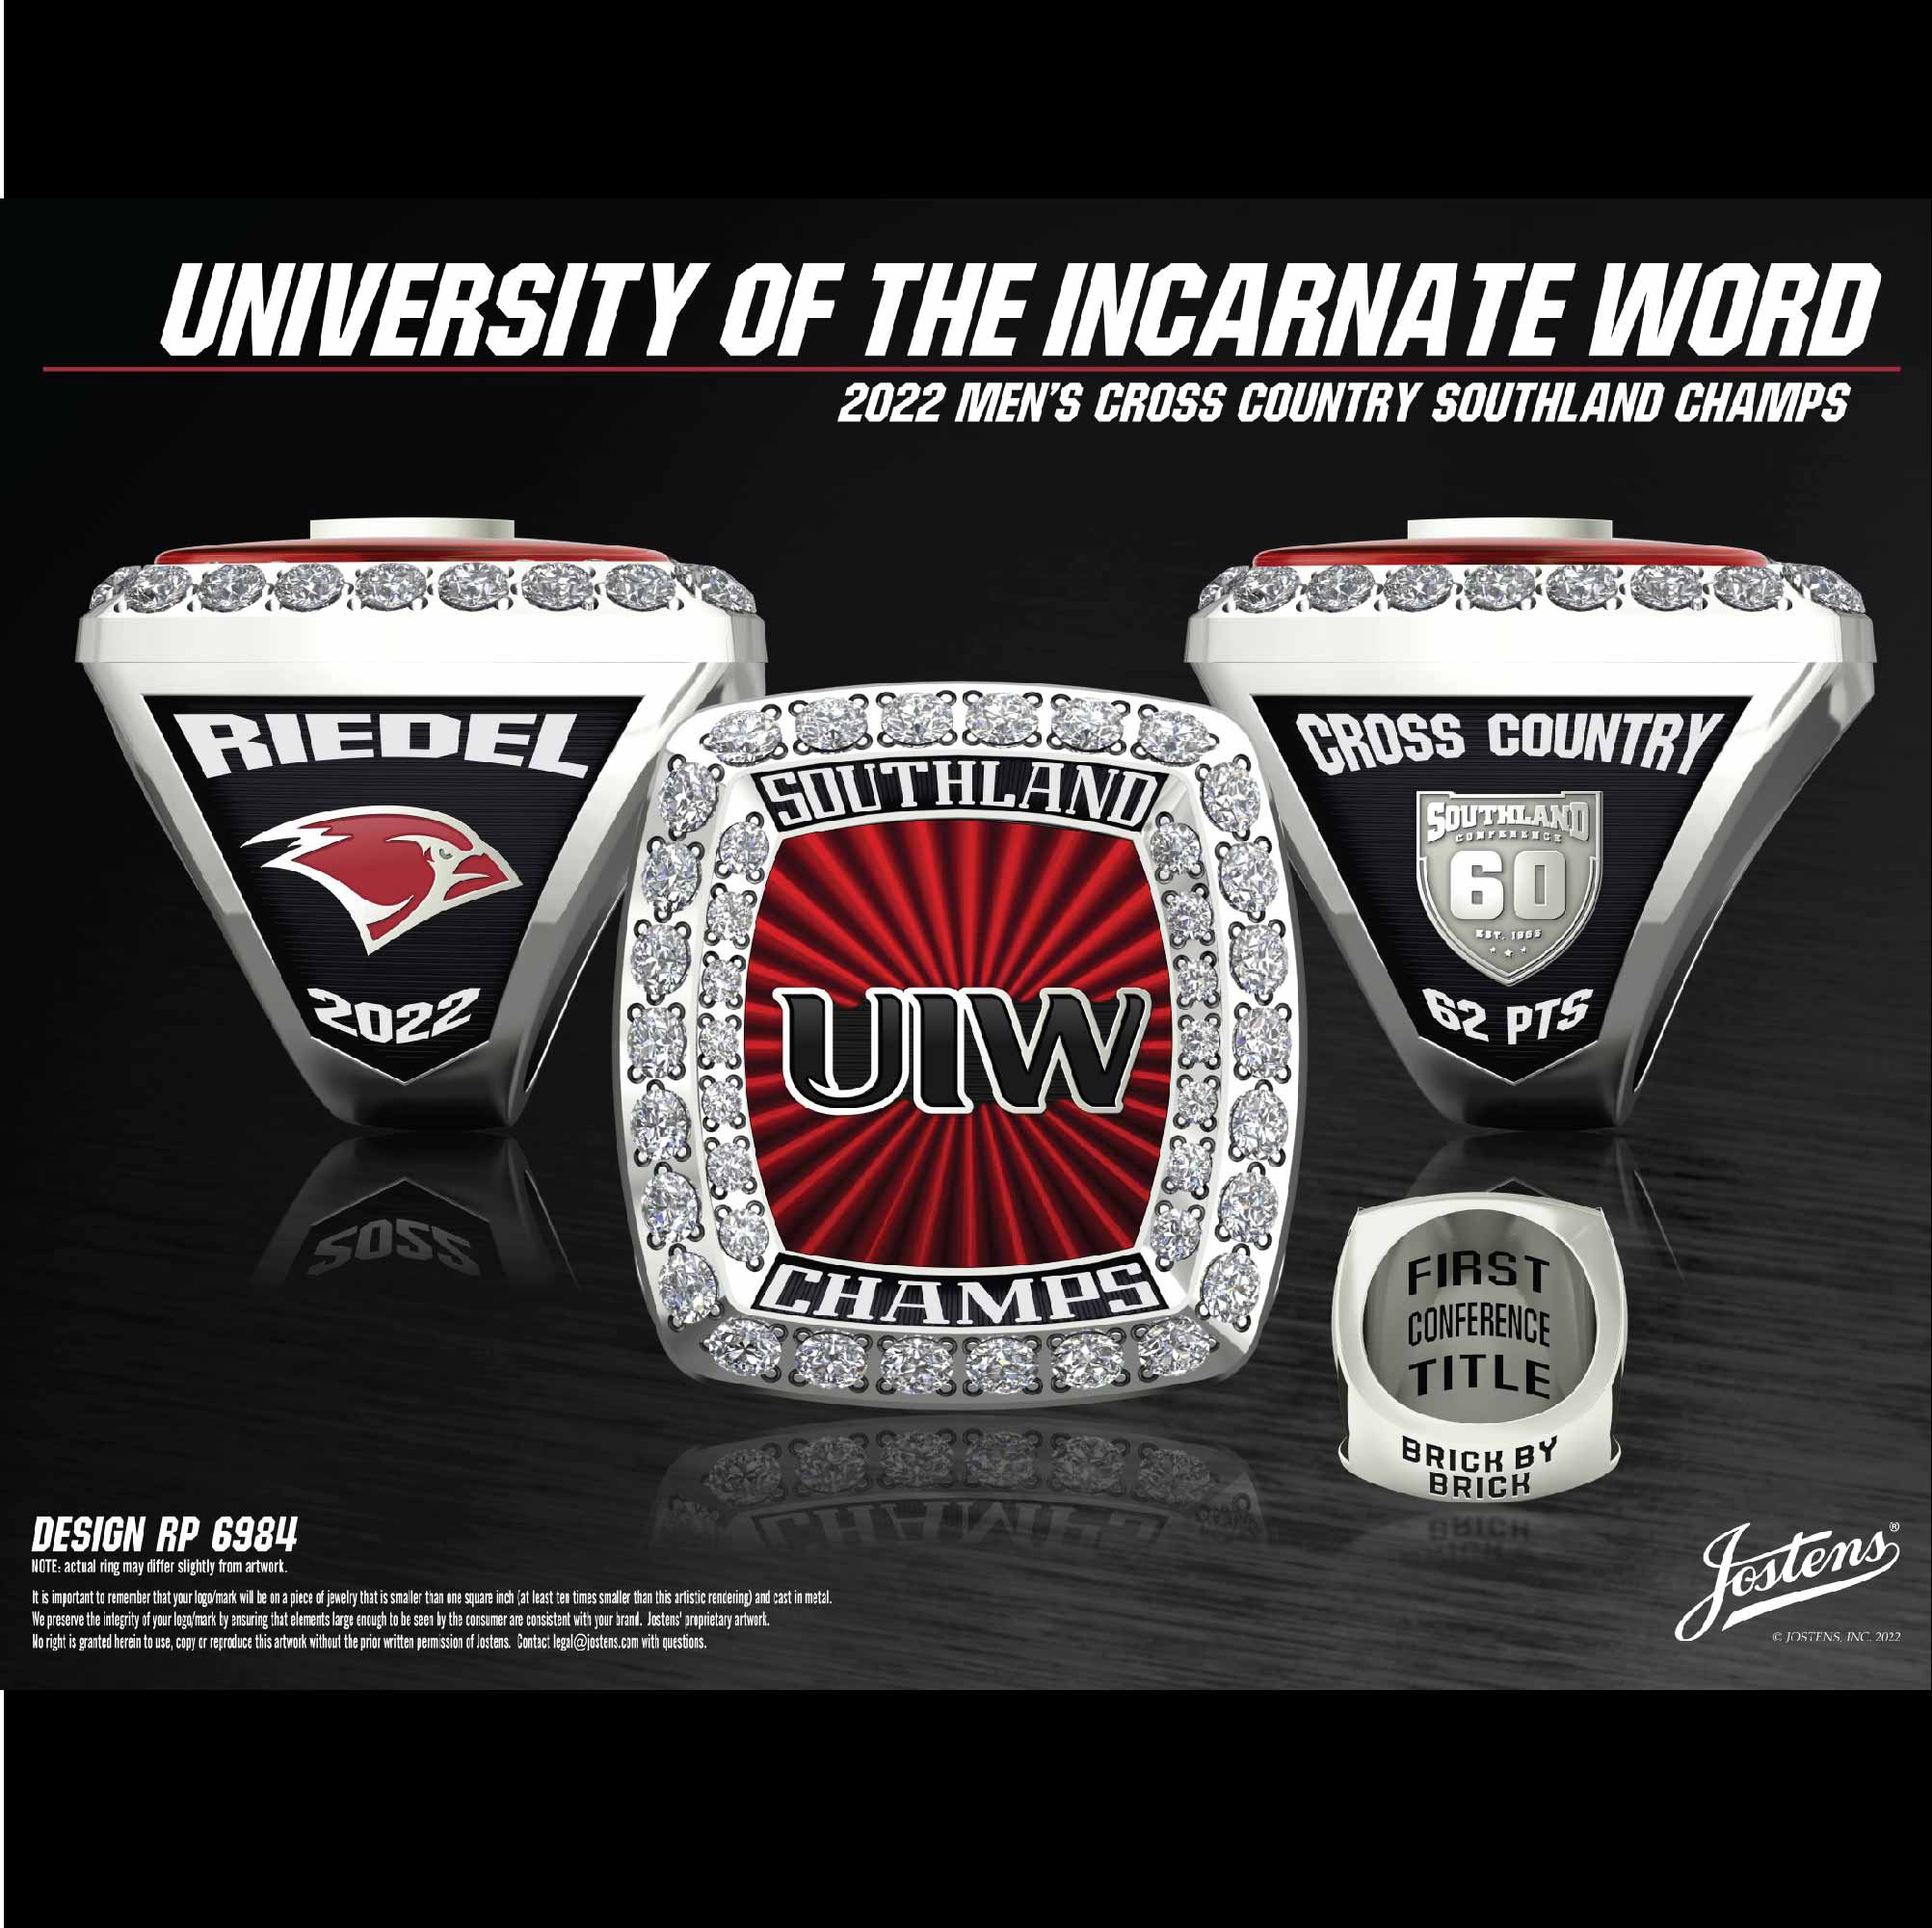 University of the Incarnate Word Men's Cross Country 2022 Southland Championship Ring